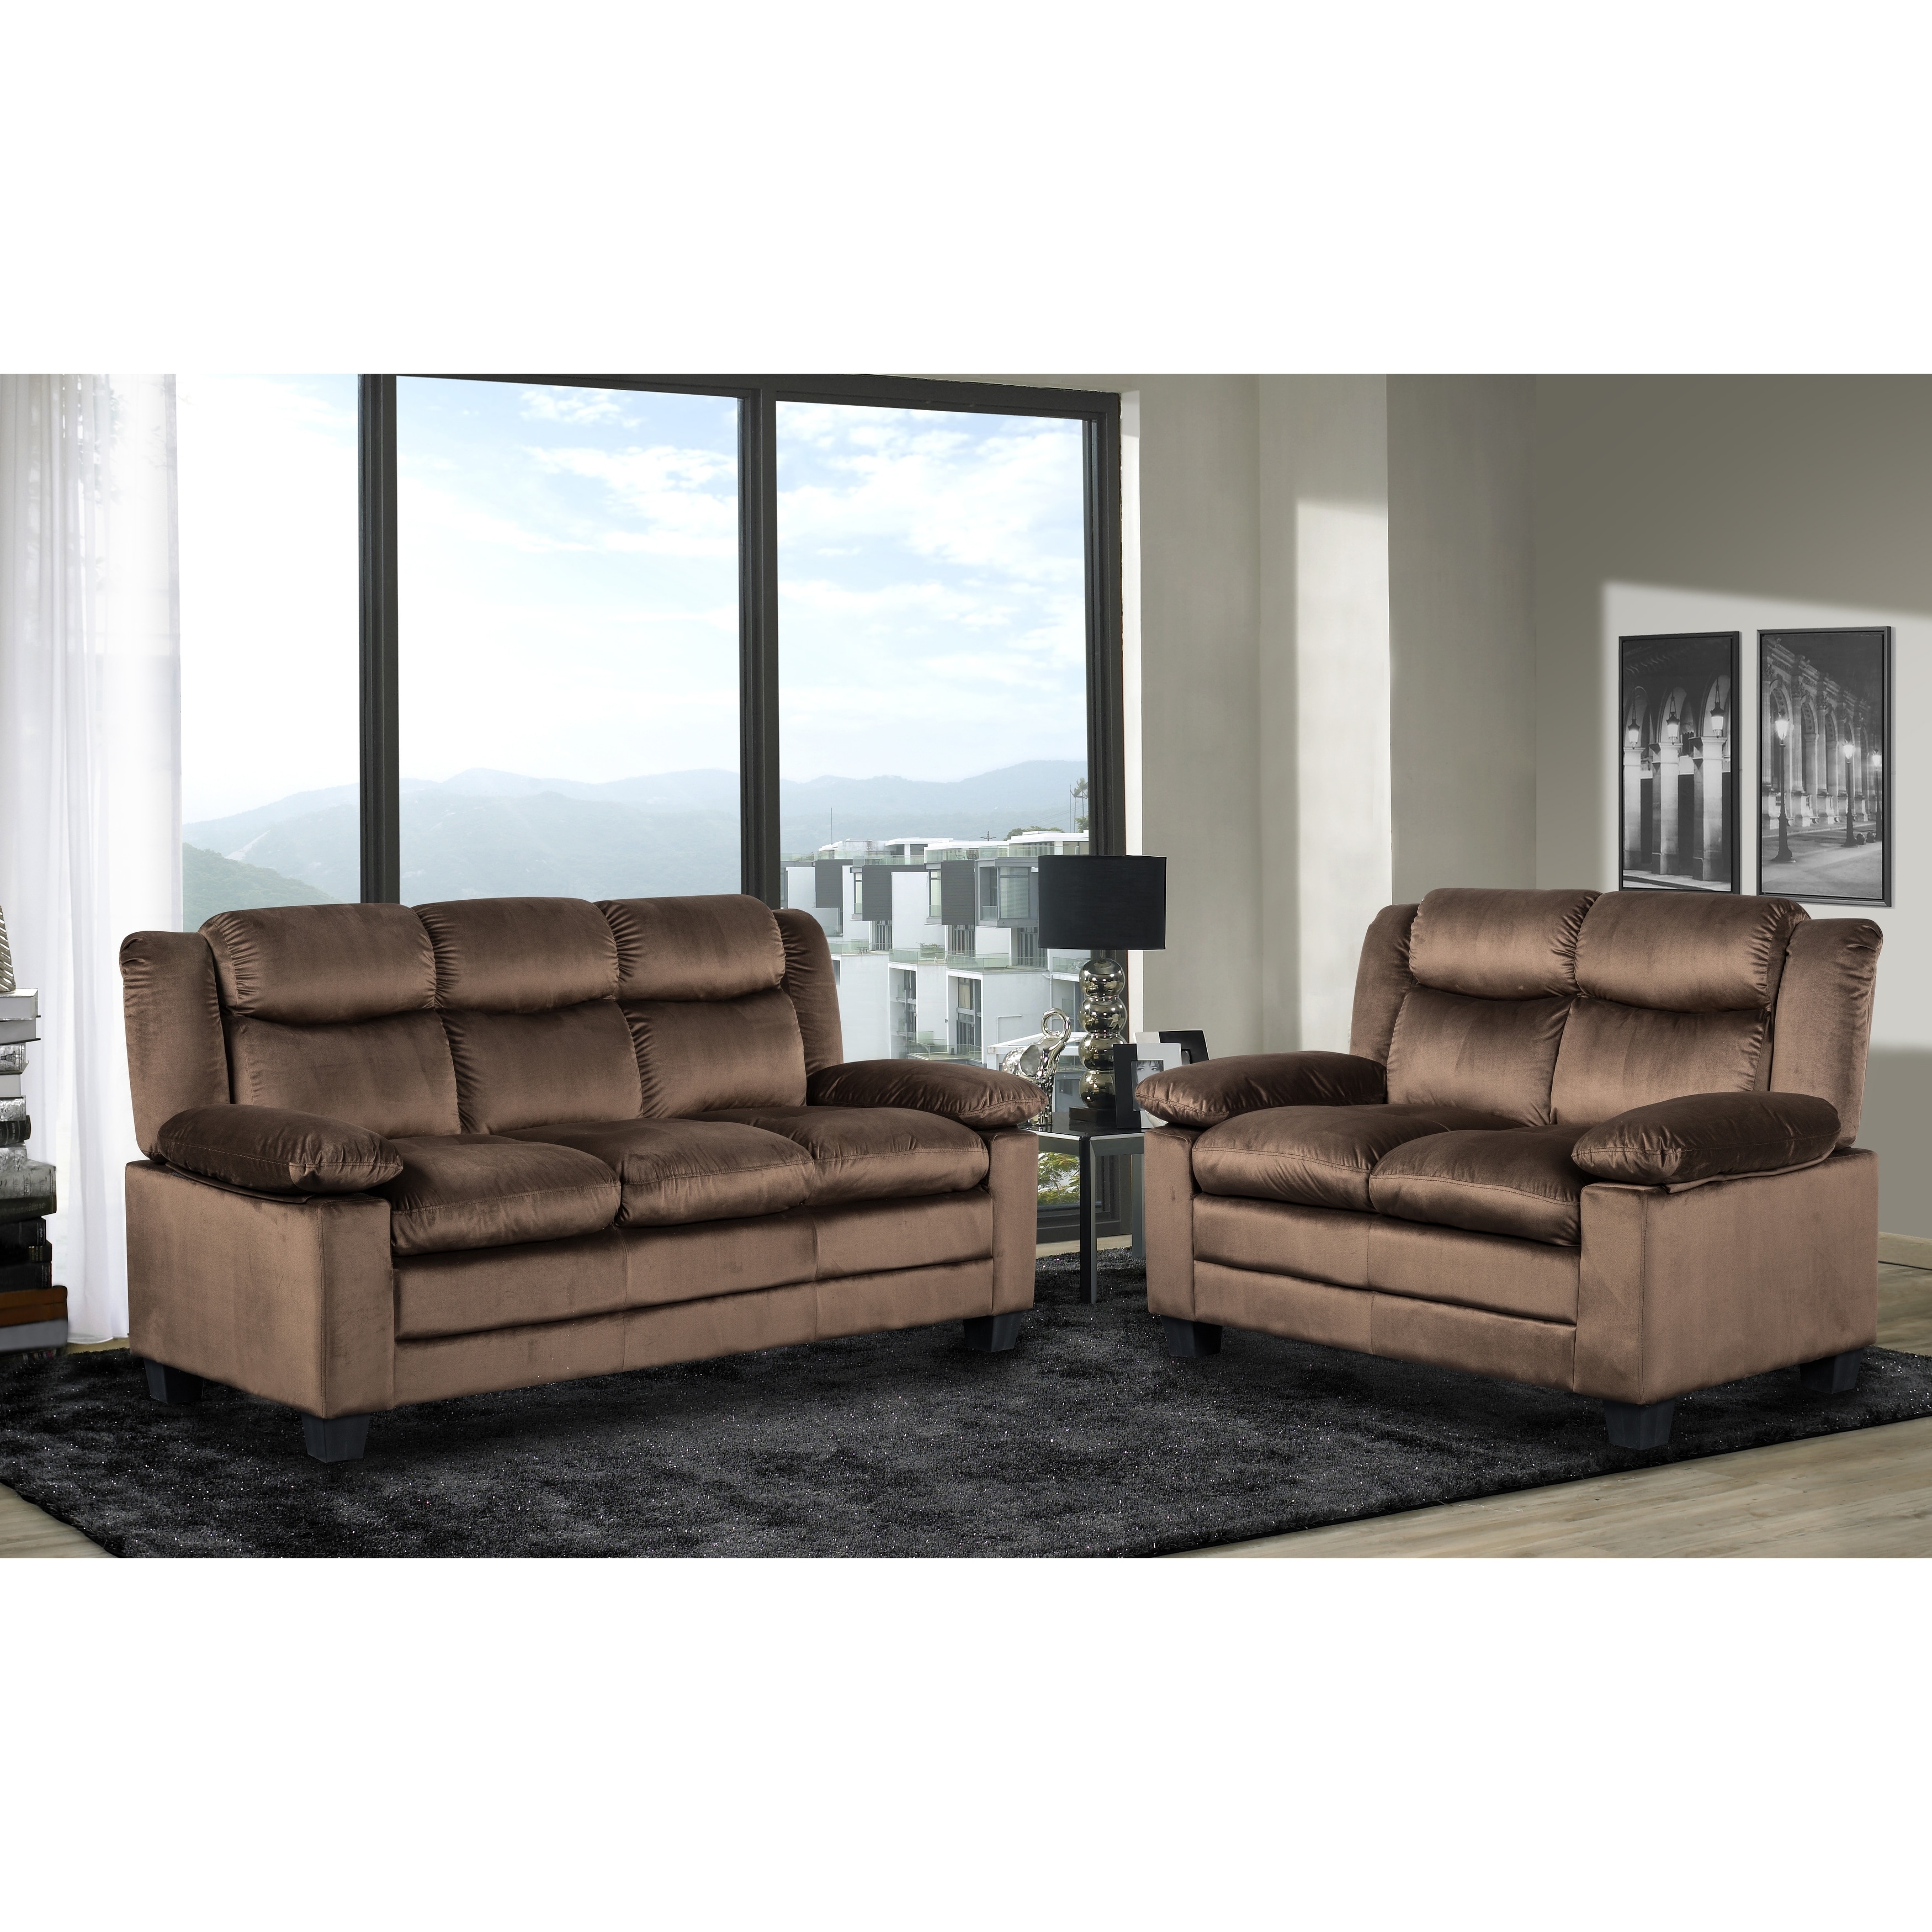 Shop Gtu Furniture Contemporary Transitional Plush And Over